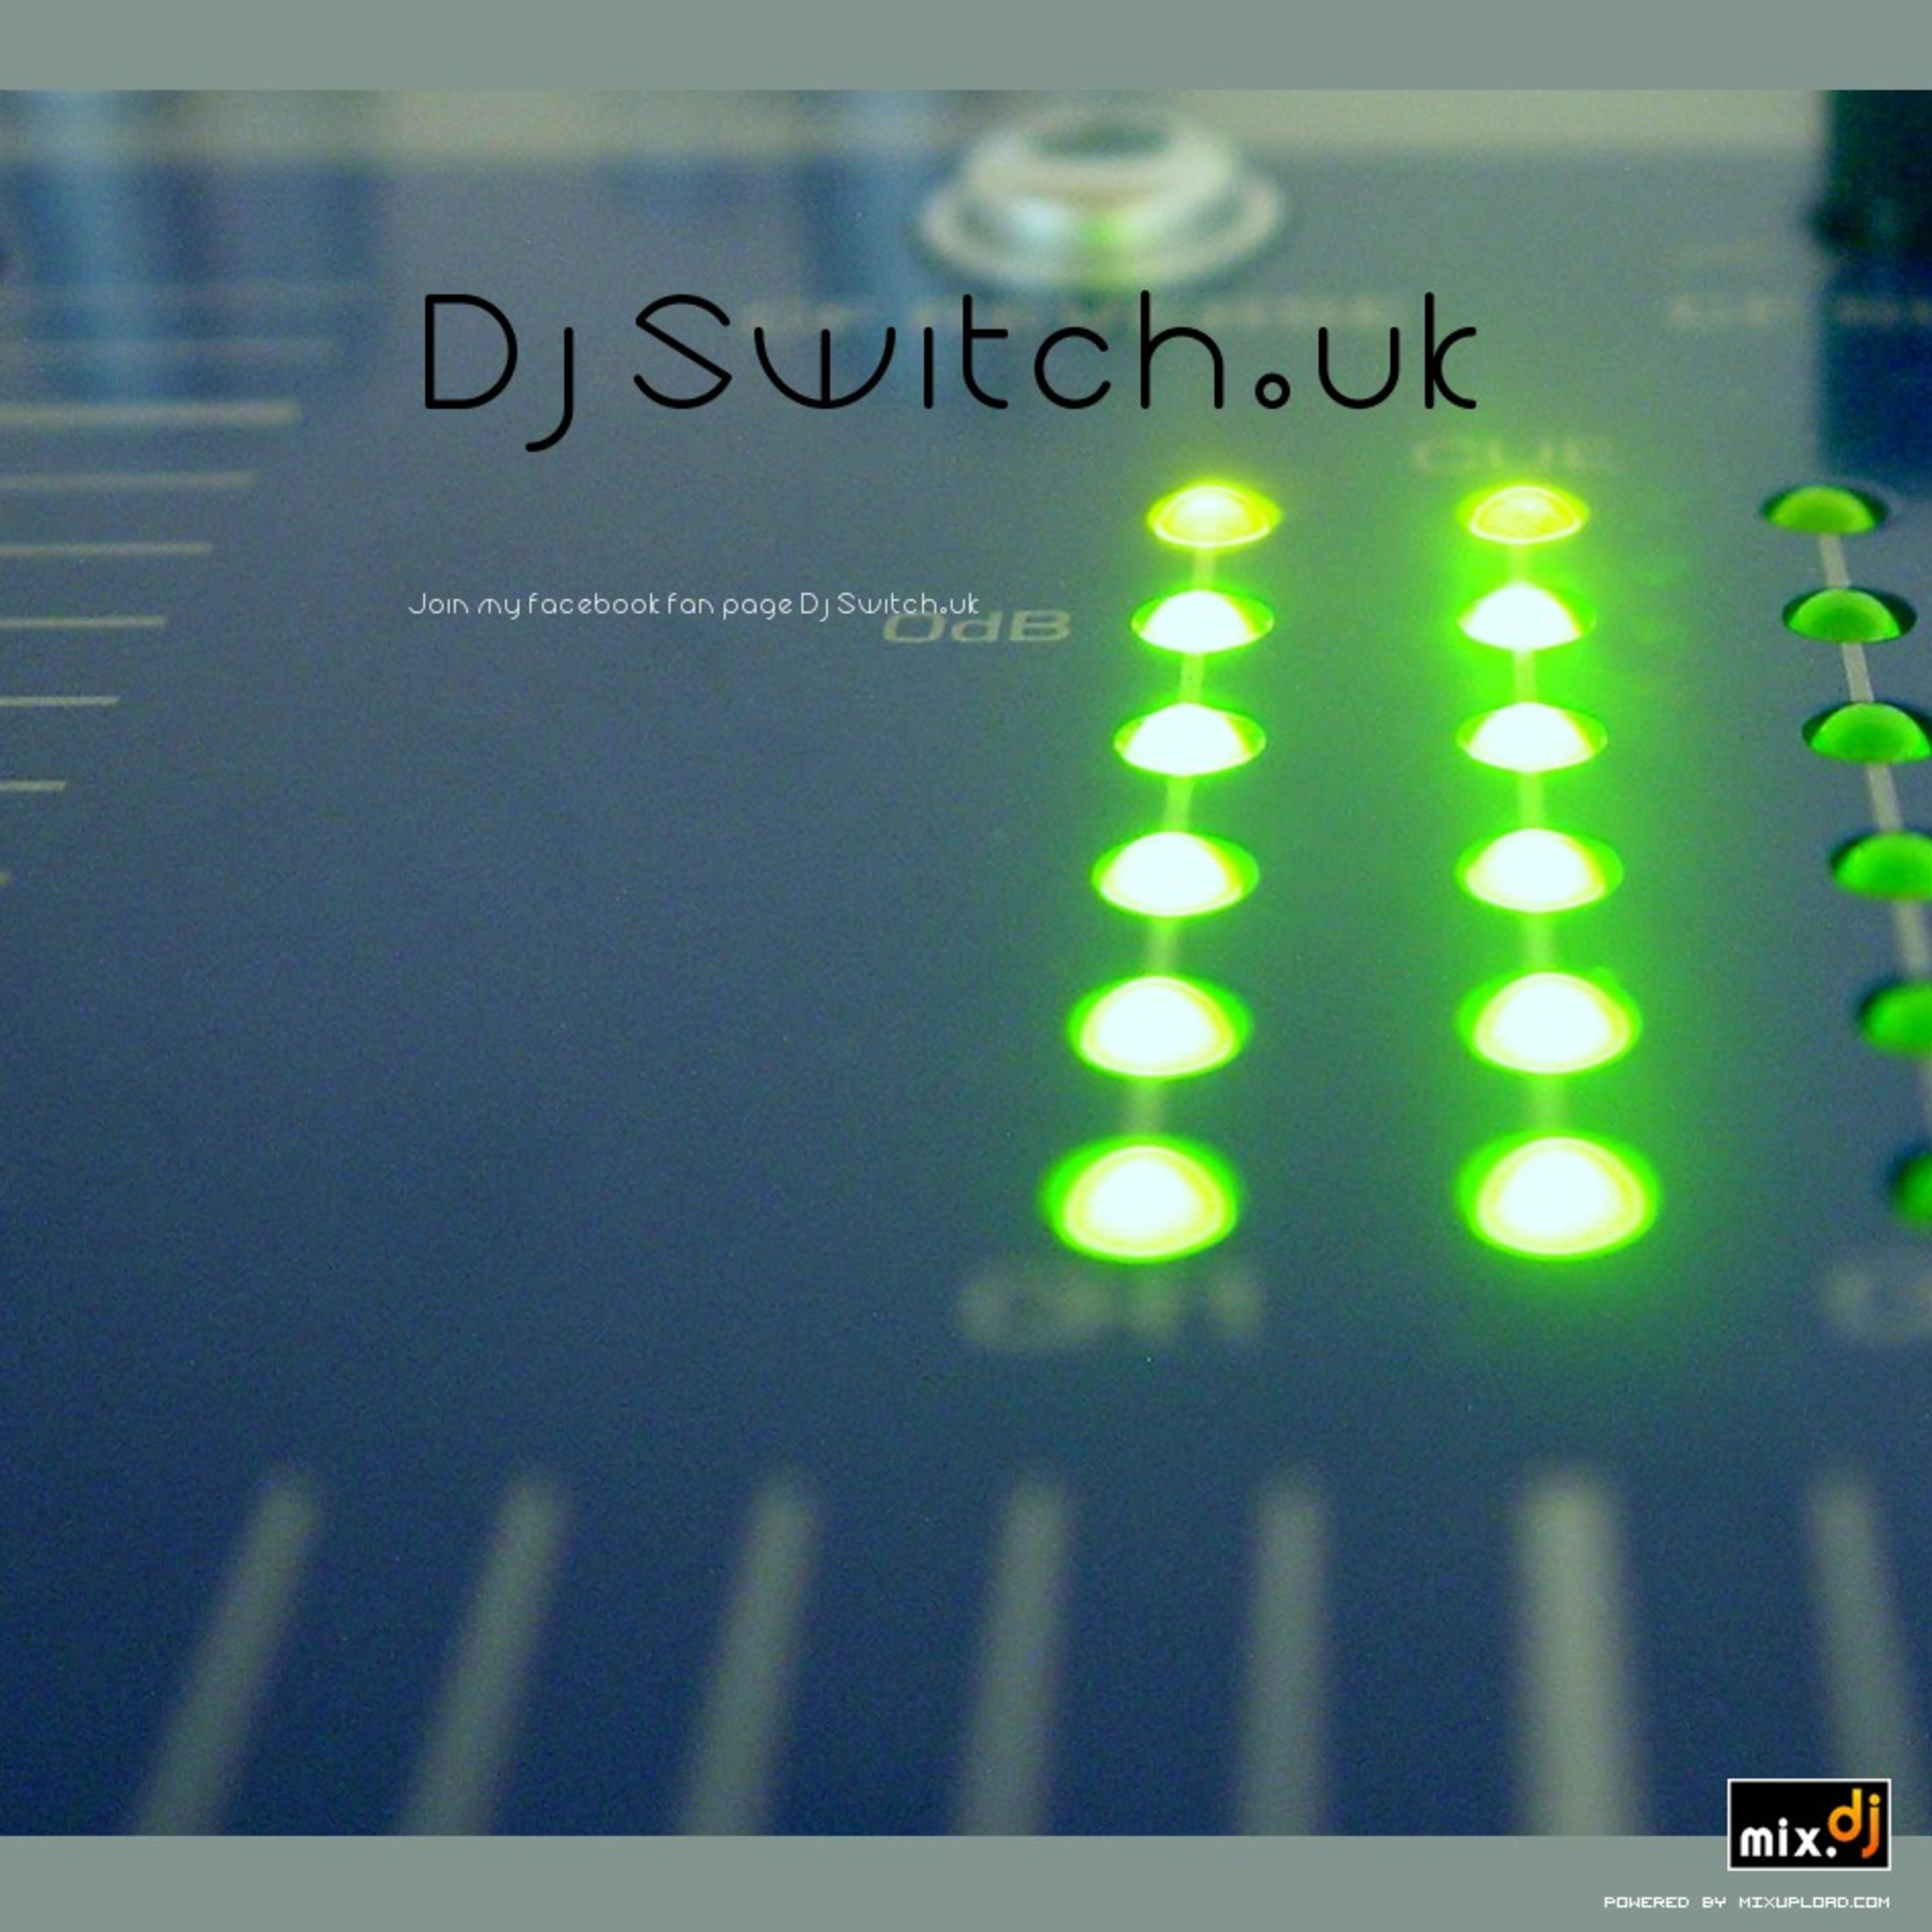 Dj Switch.uk's Switched on